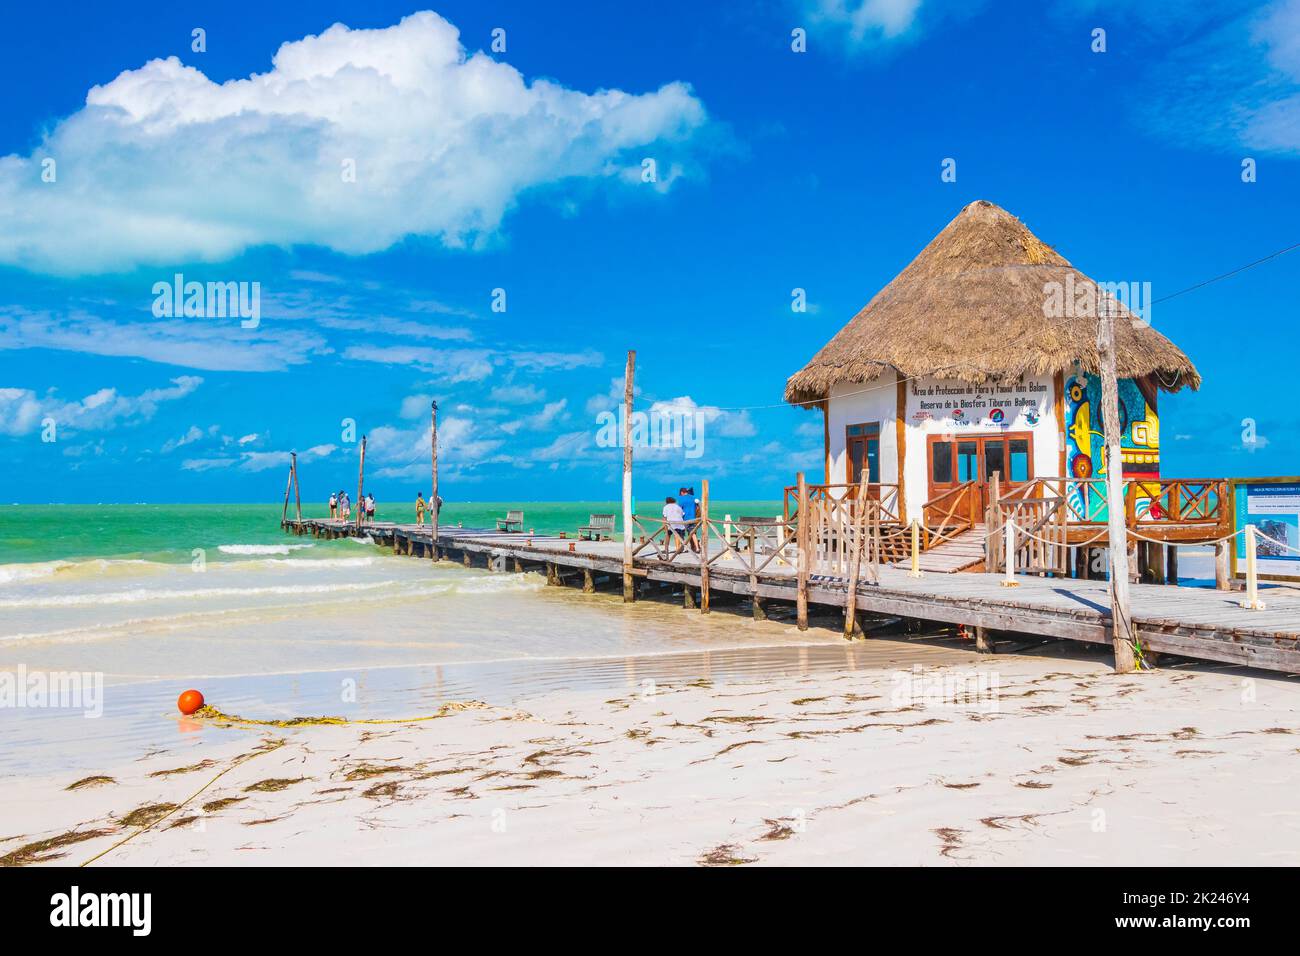 Holbox Mexico 21. December 2021 Panorama landscape view on beautiful Holbox island sandbank and beach with waves turquoise water and blue sky in Quint Stock Photo